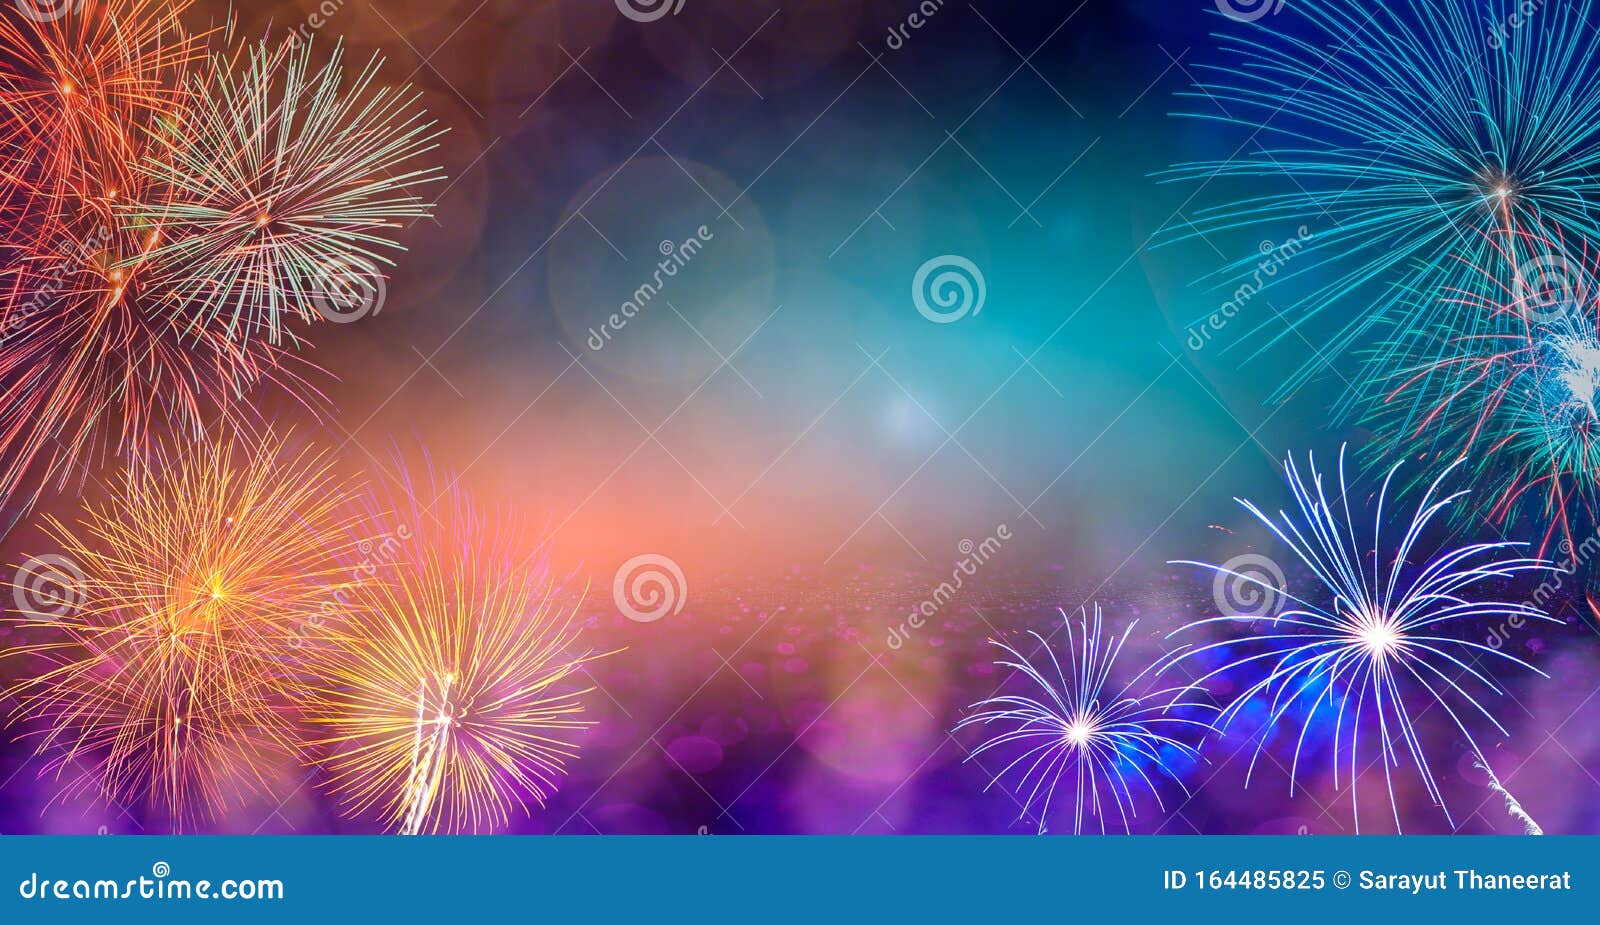 abstract  background with fireworks.background of new years day celebration many colorful